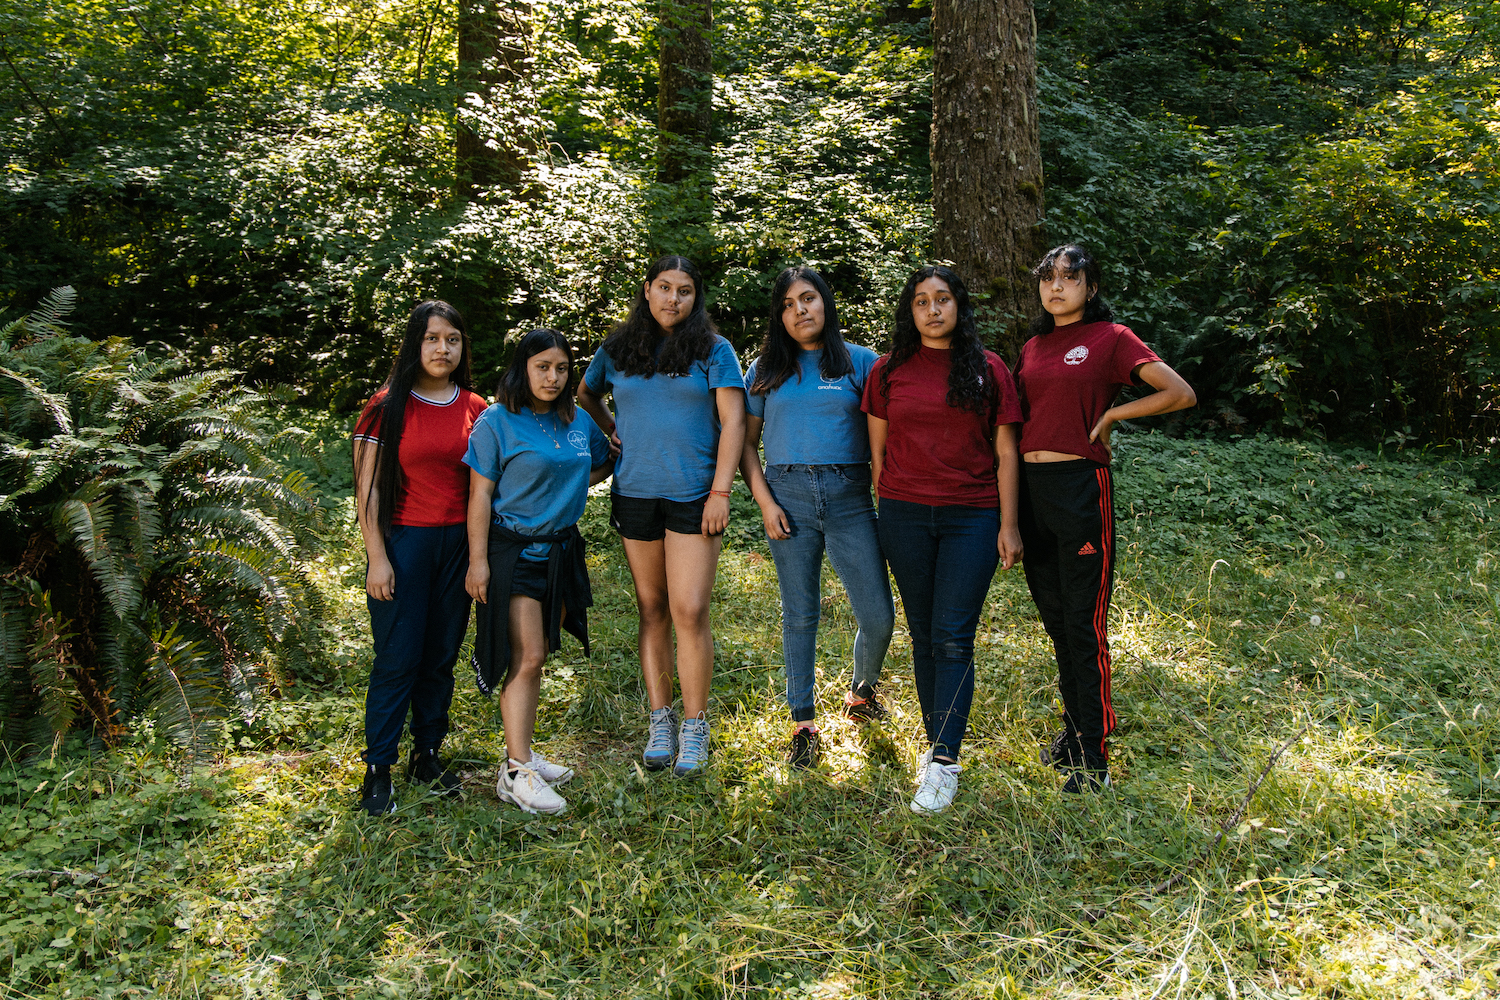 Diana, Adabella, Estrella, Karina, Neida, and Aide are among the youth leaders who supported Capaces Leadership Institute's summer learning program.